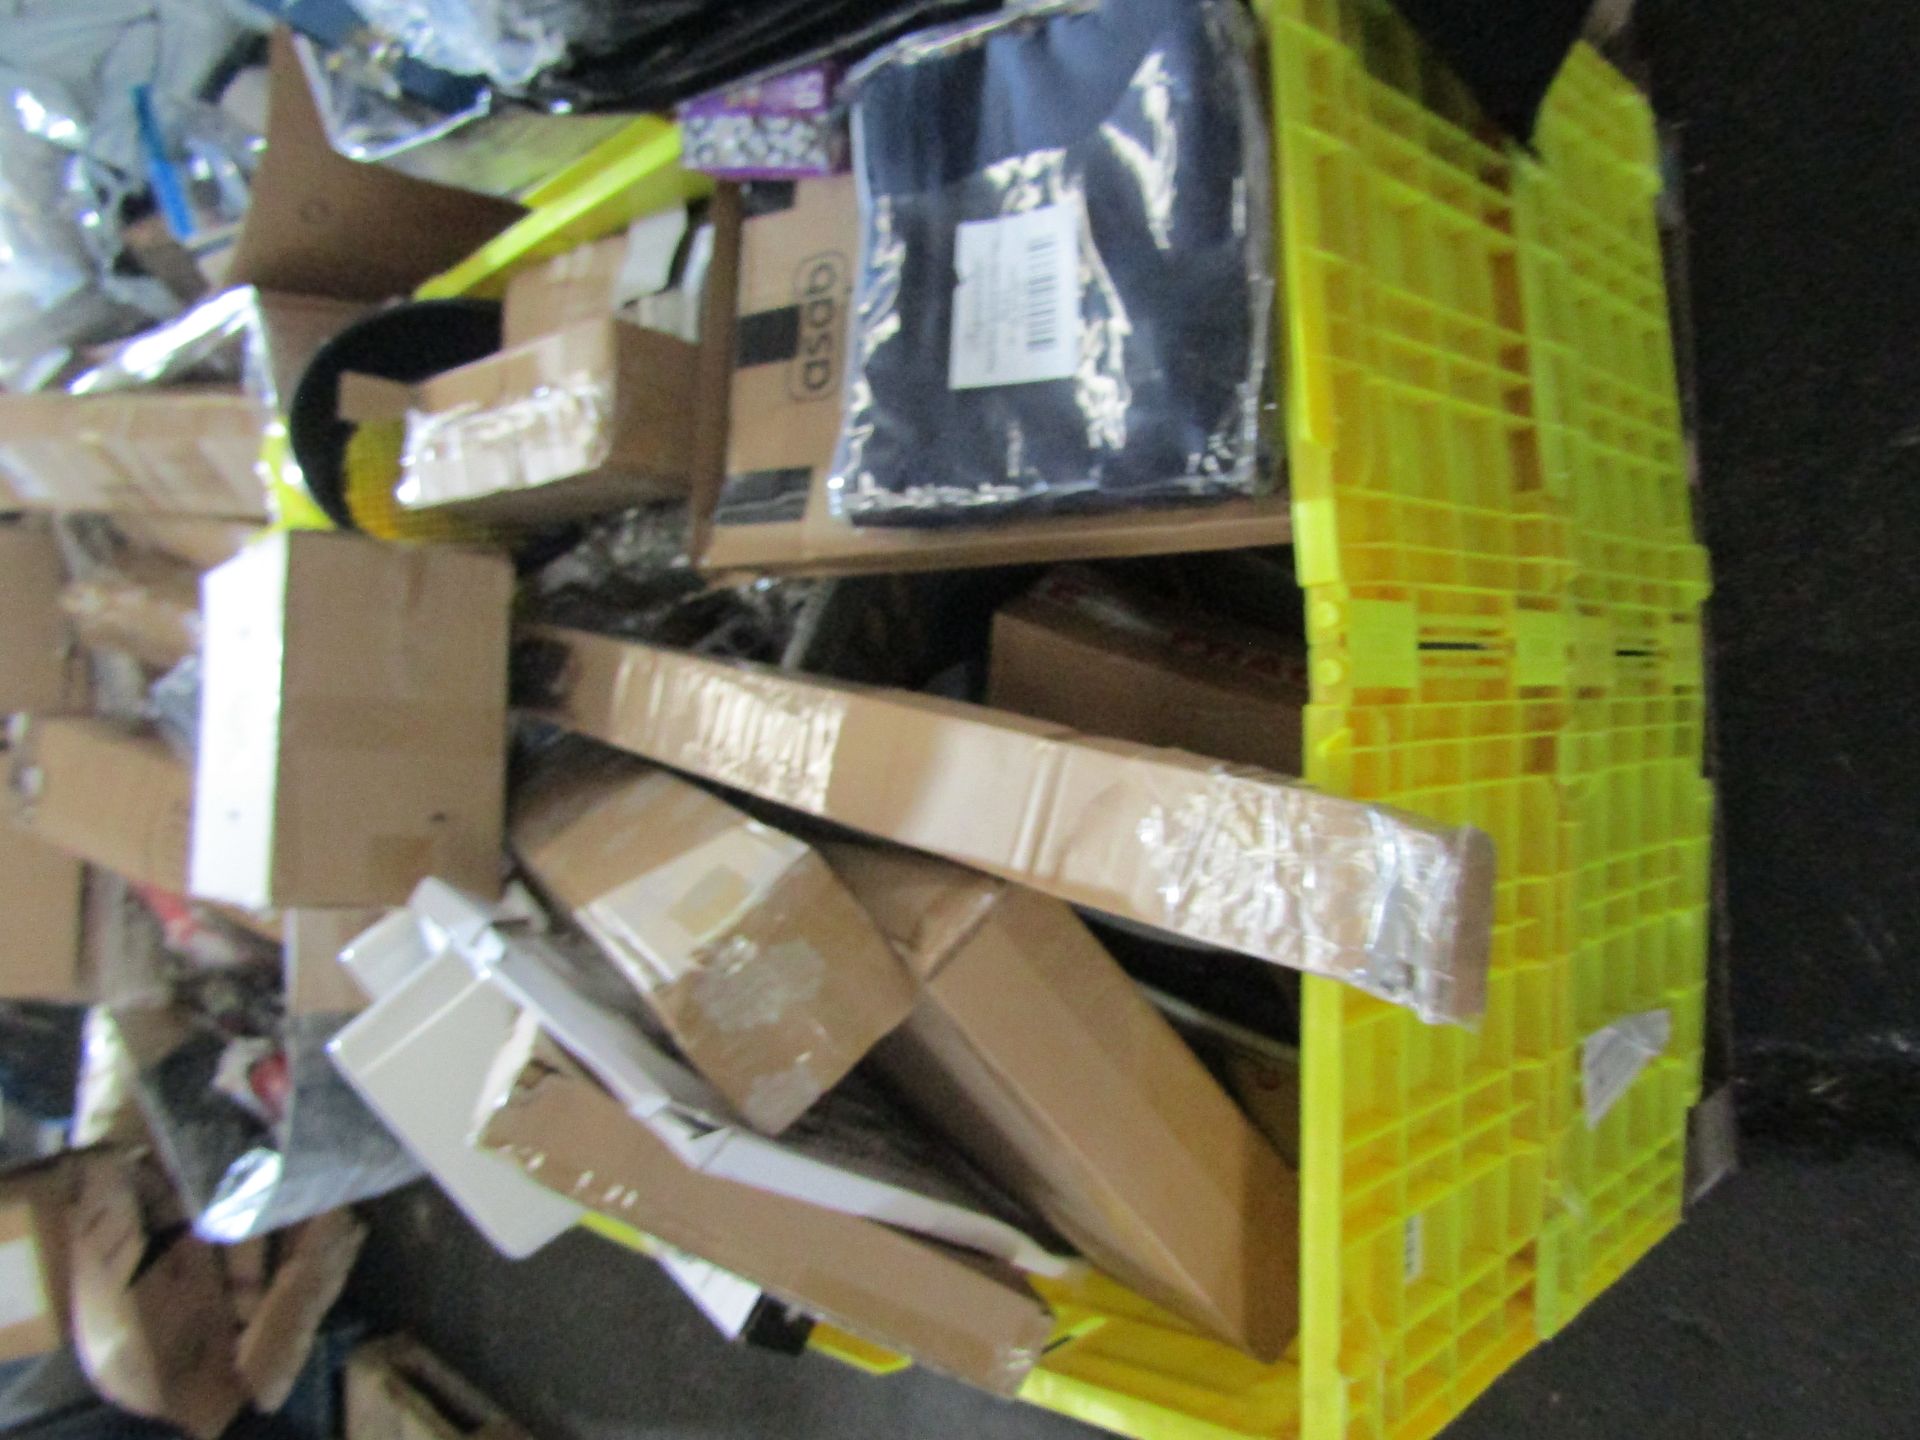 Pallet of online customer returns homewares. Xmas and fancy goods, some in packaging and some not,